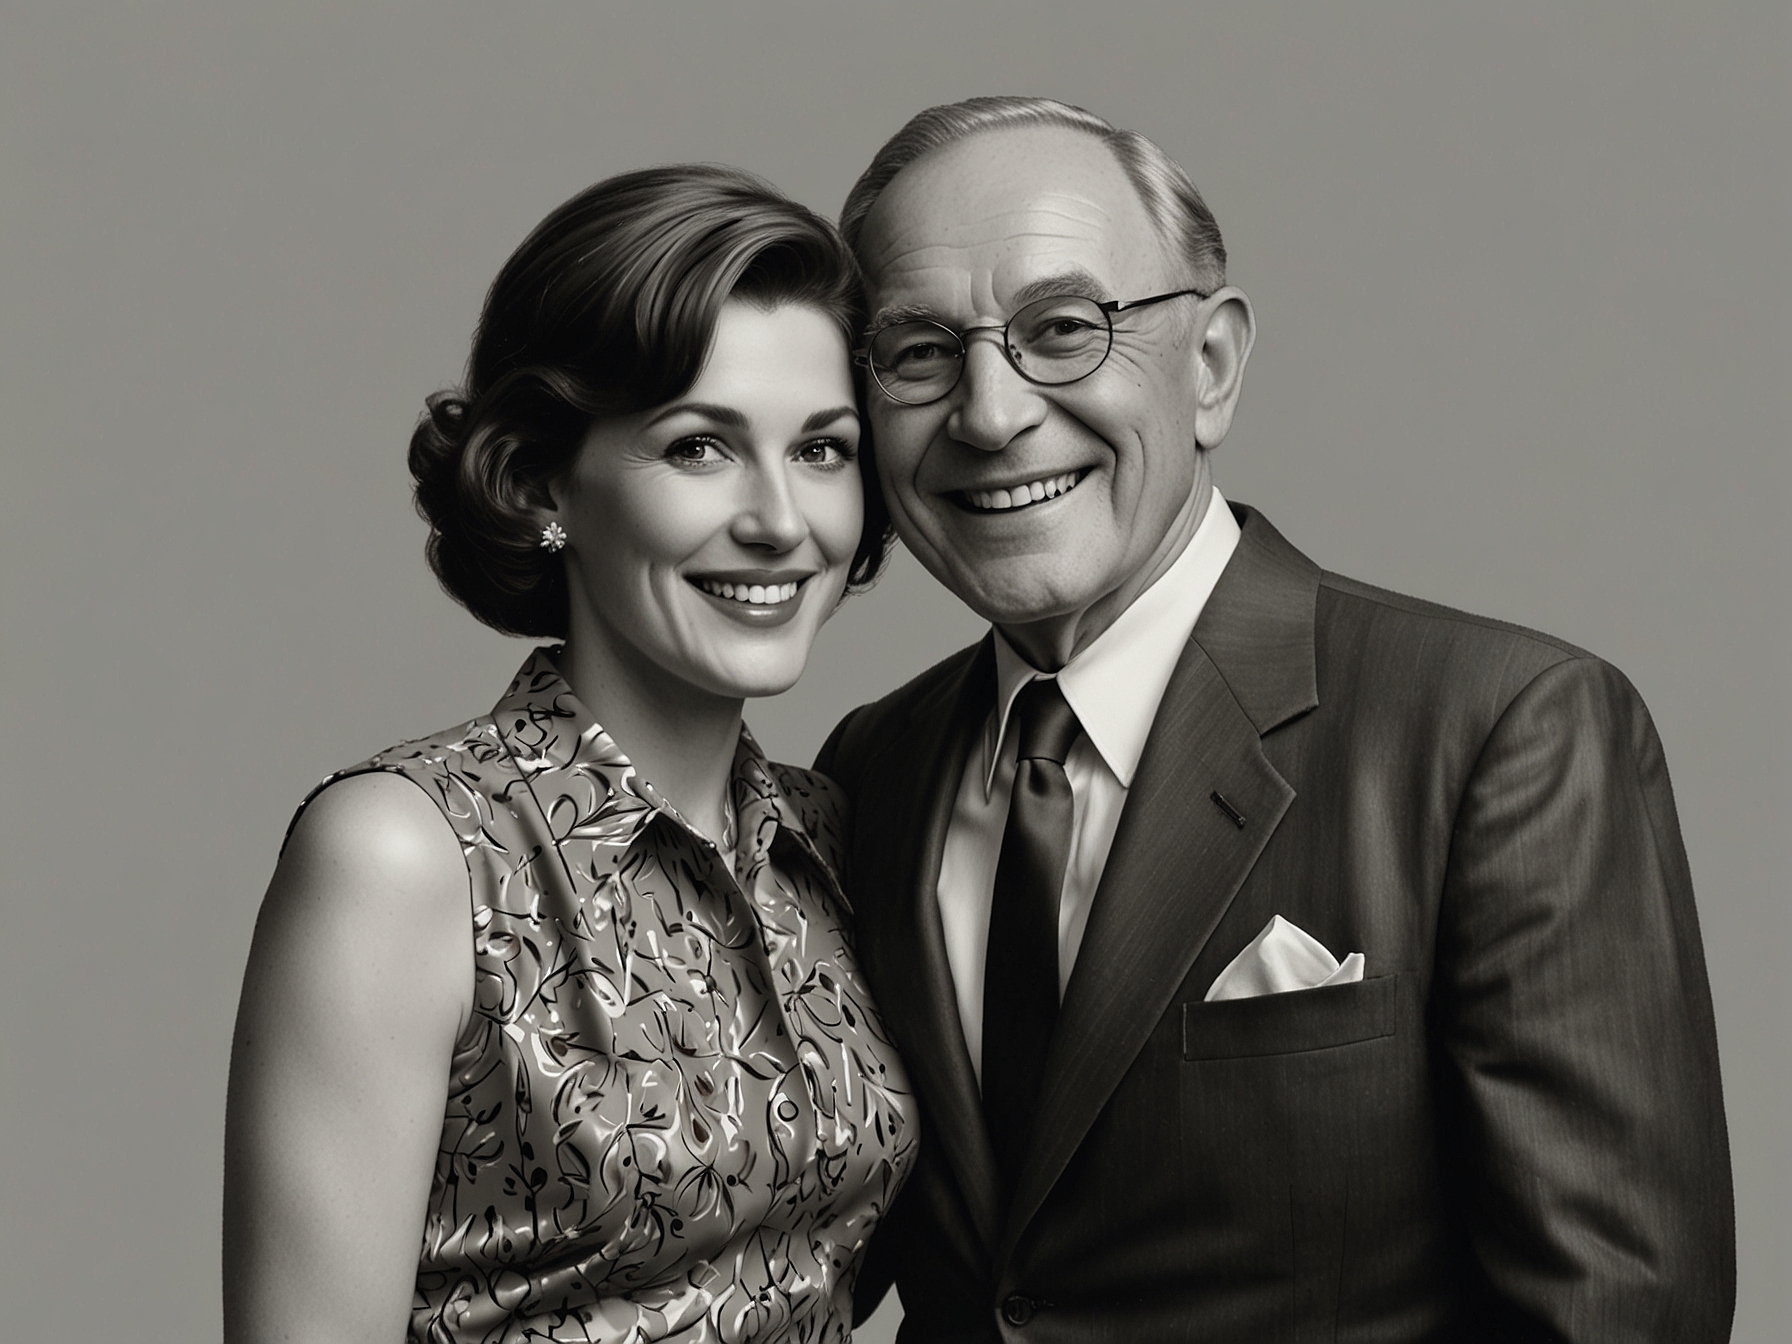 A touching image of Hiram Kasten and his wife Diana celebrating their anniversary, highlighting their enduring love and partnership amidst Kasten's successful career in comedy.